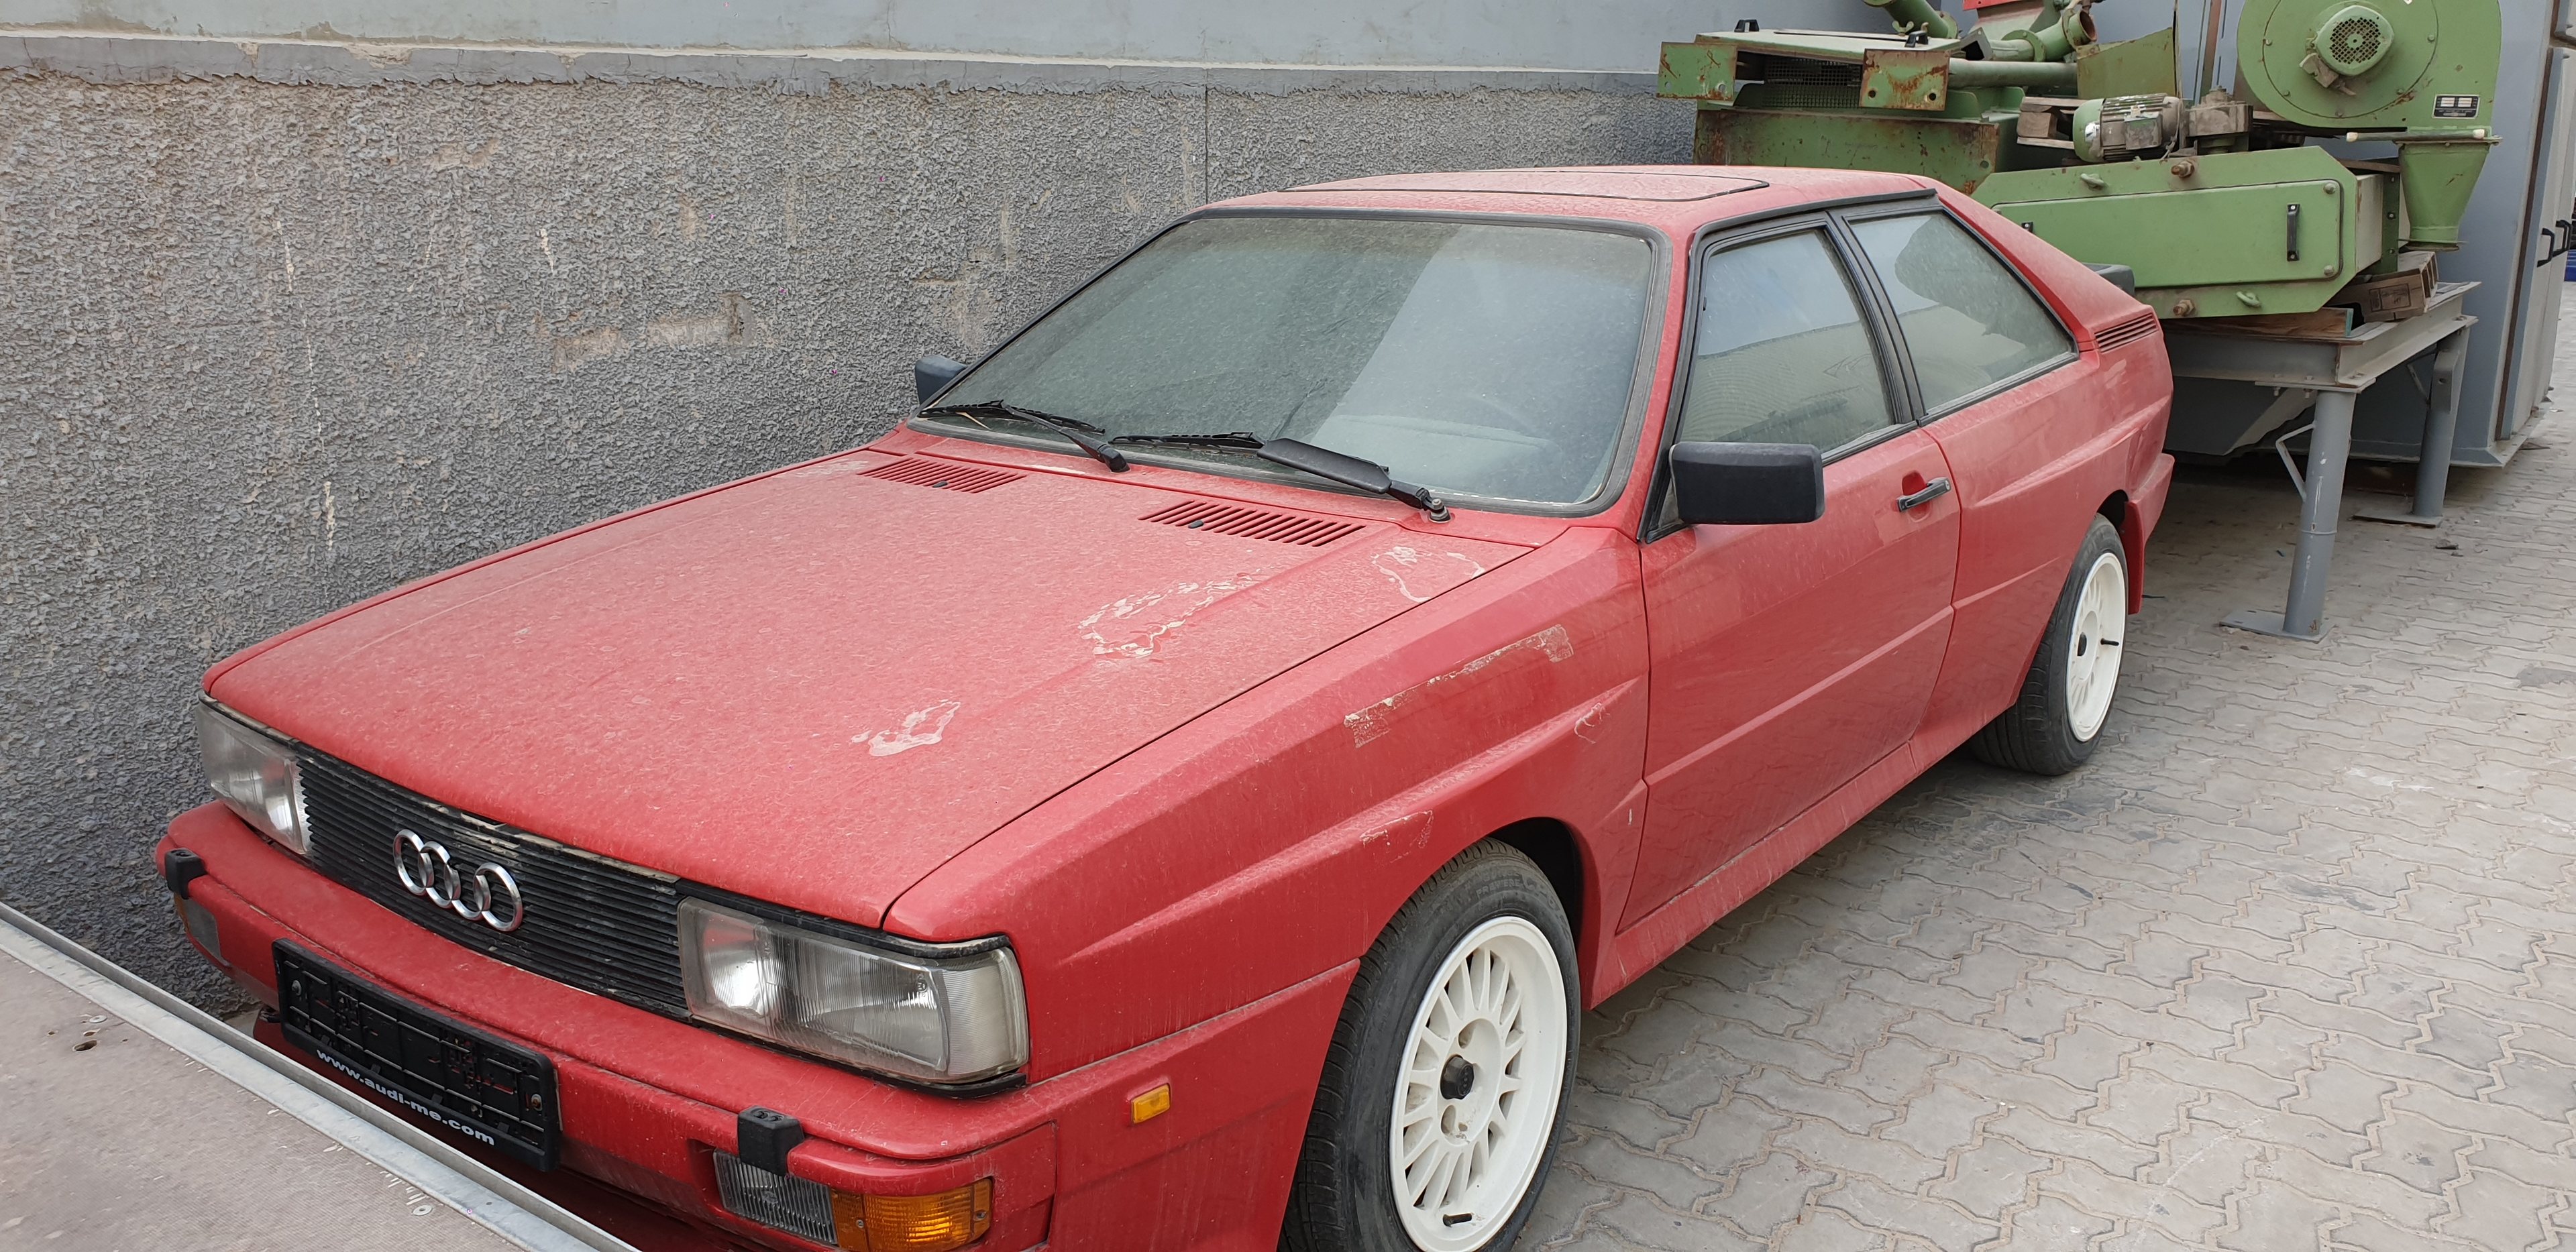 Audi Quattro UR (MB Engine)  - Page 2 - Classic Cars and Yesterday's Heroes - PistonHeads